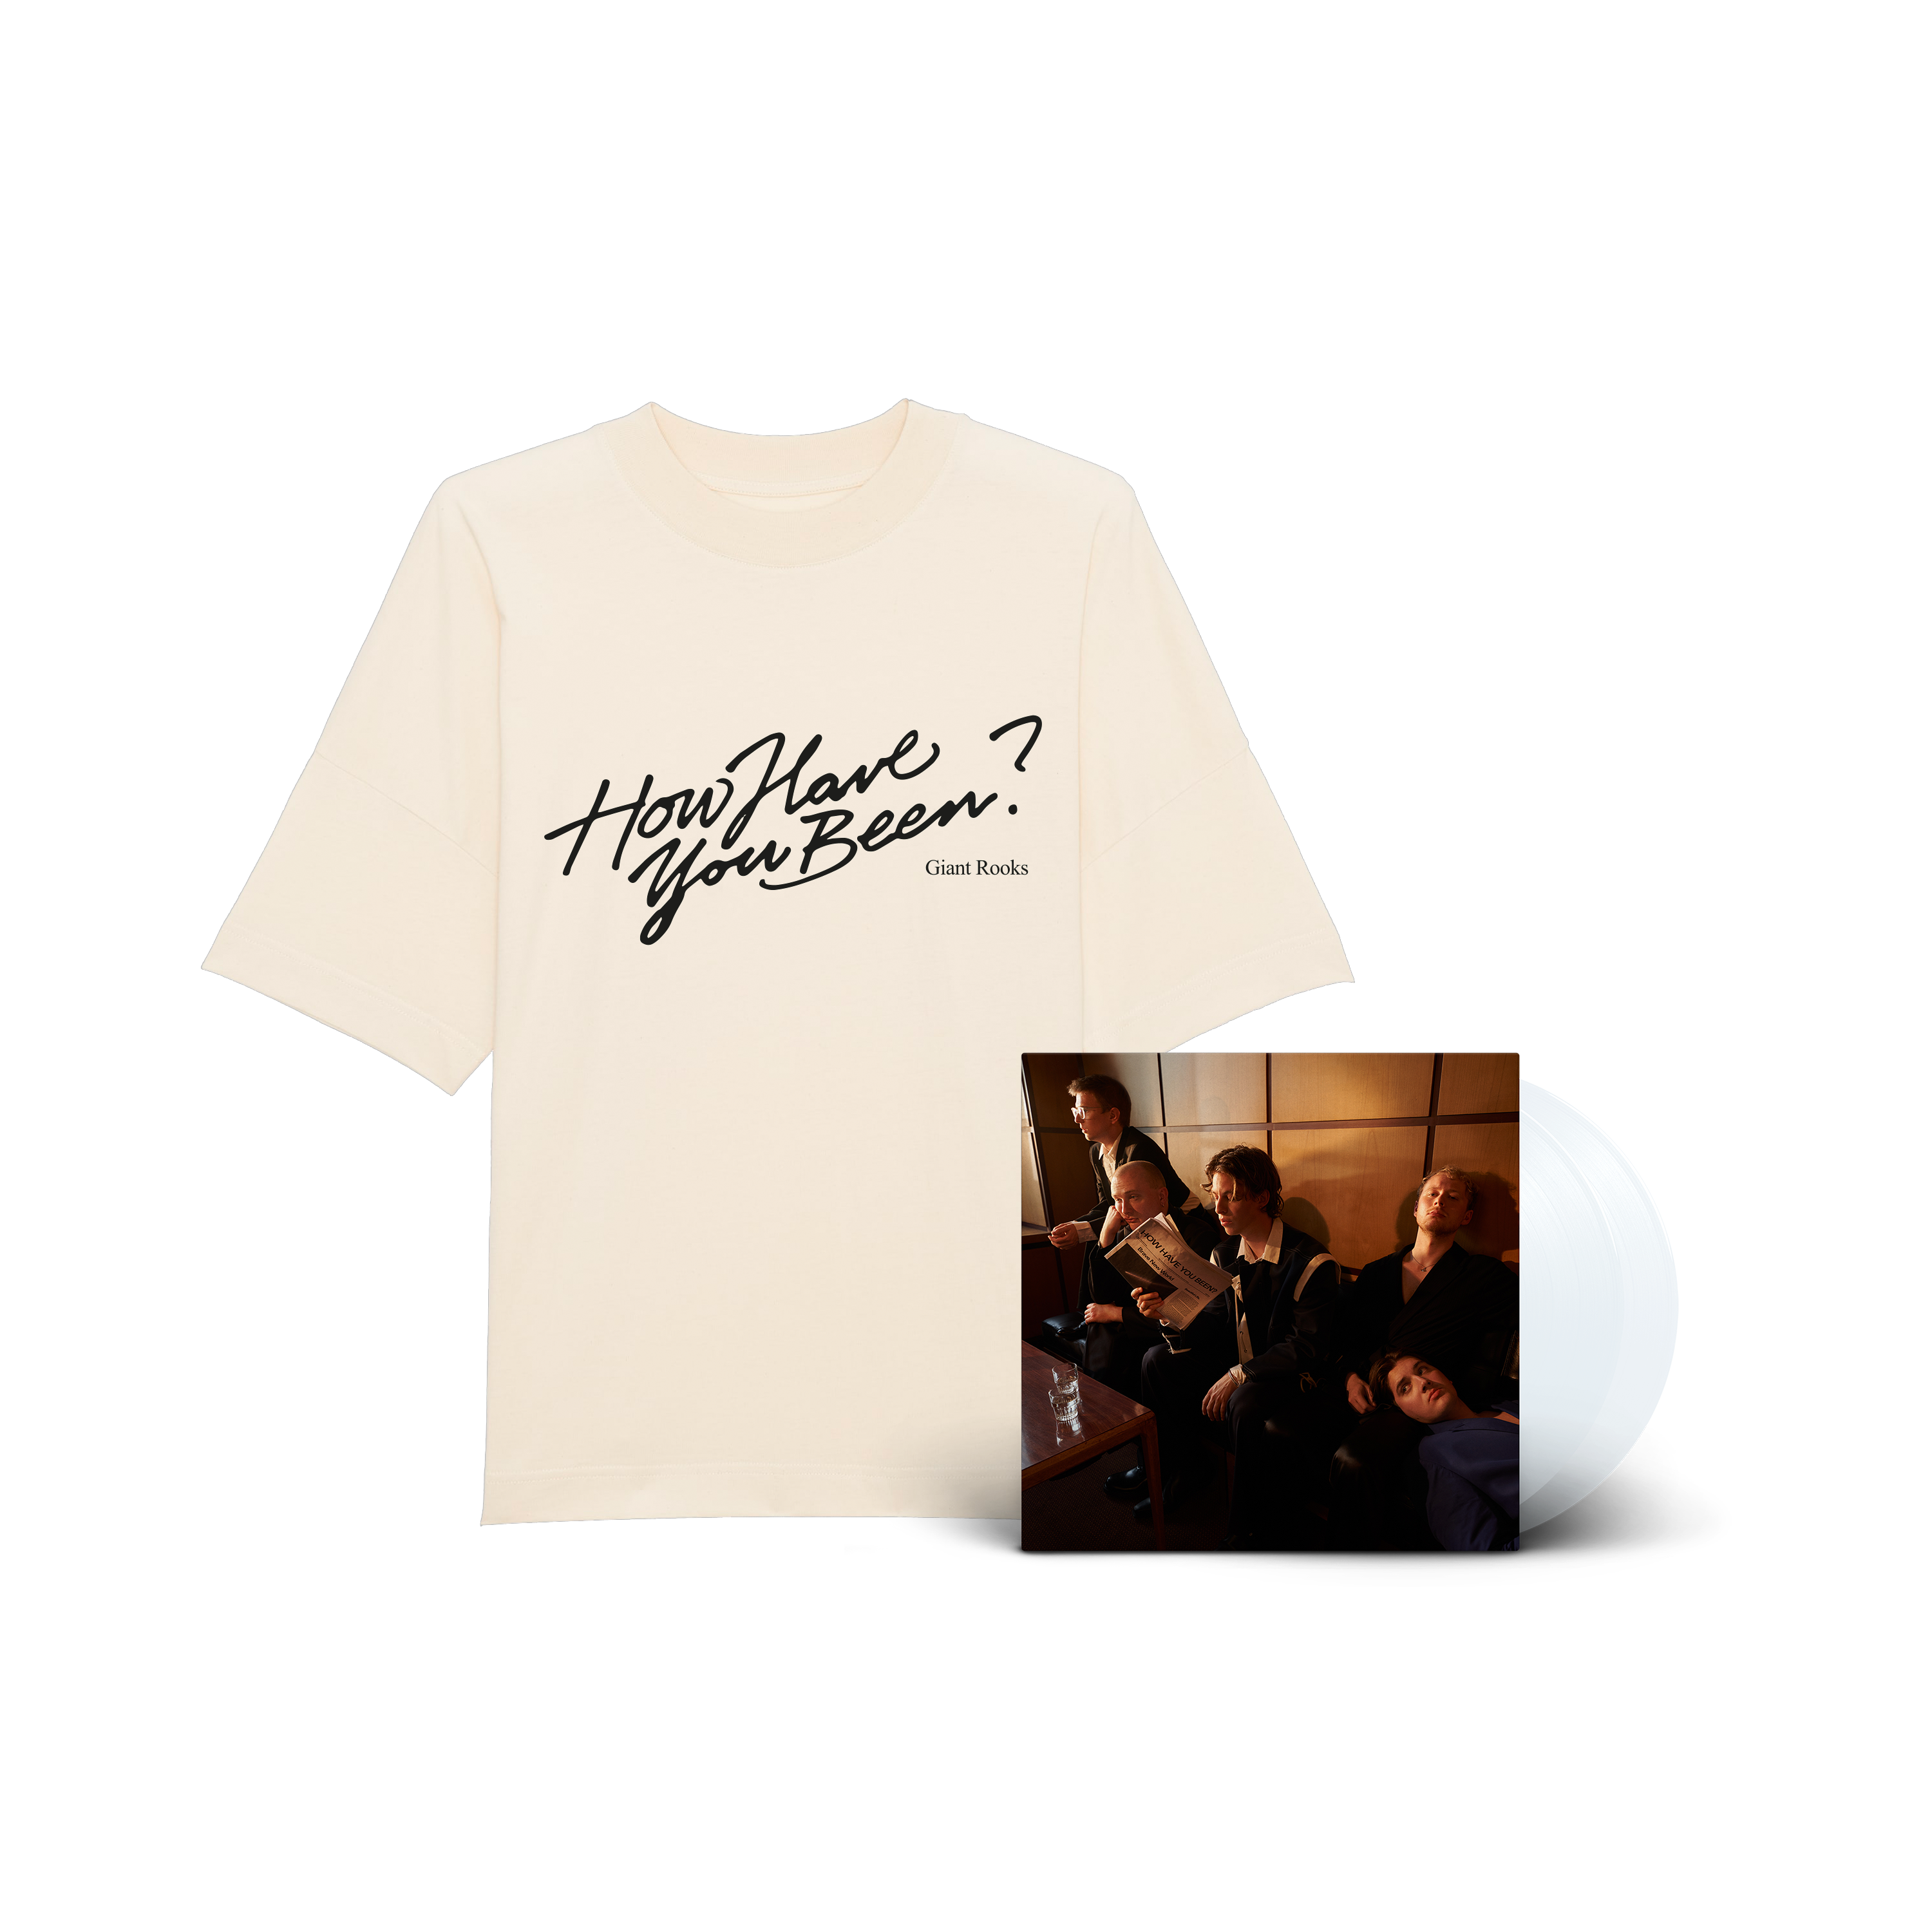 Ltd. Signed 2LP Crystal Clear + T-Shirt Natural Raw